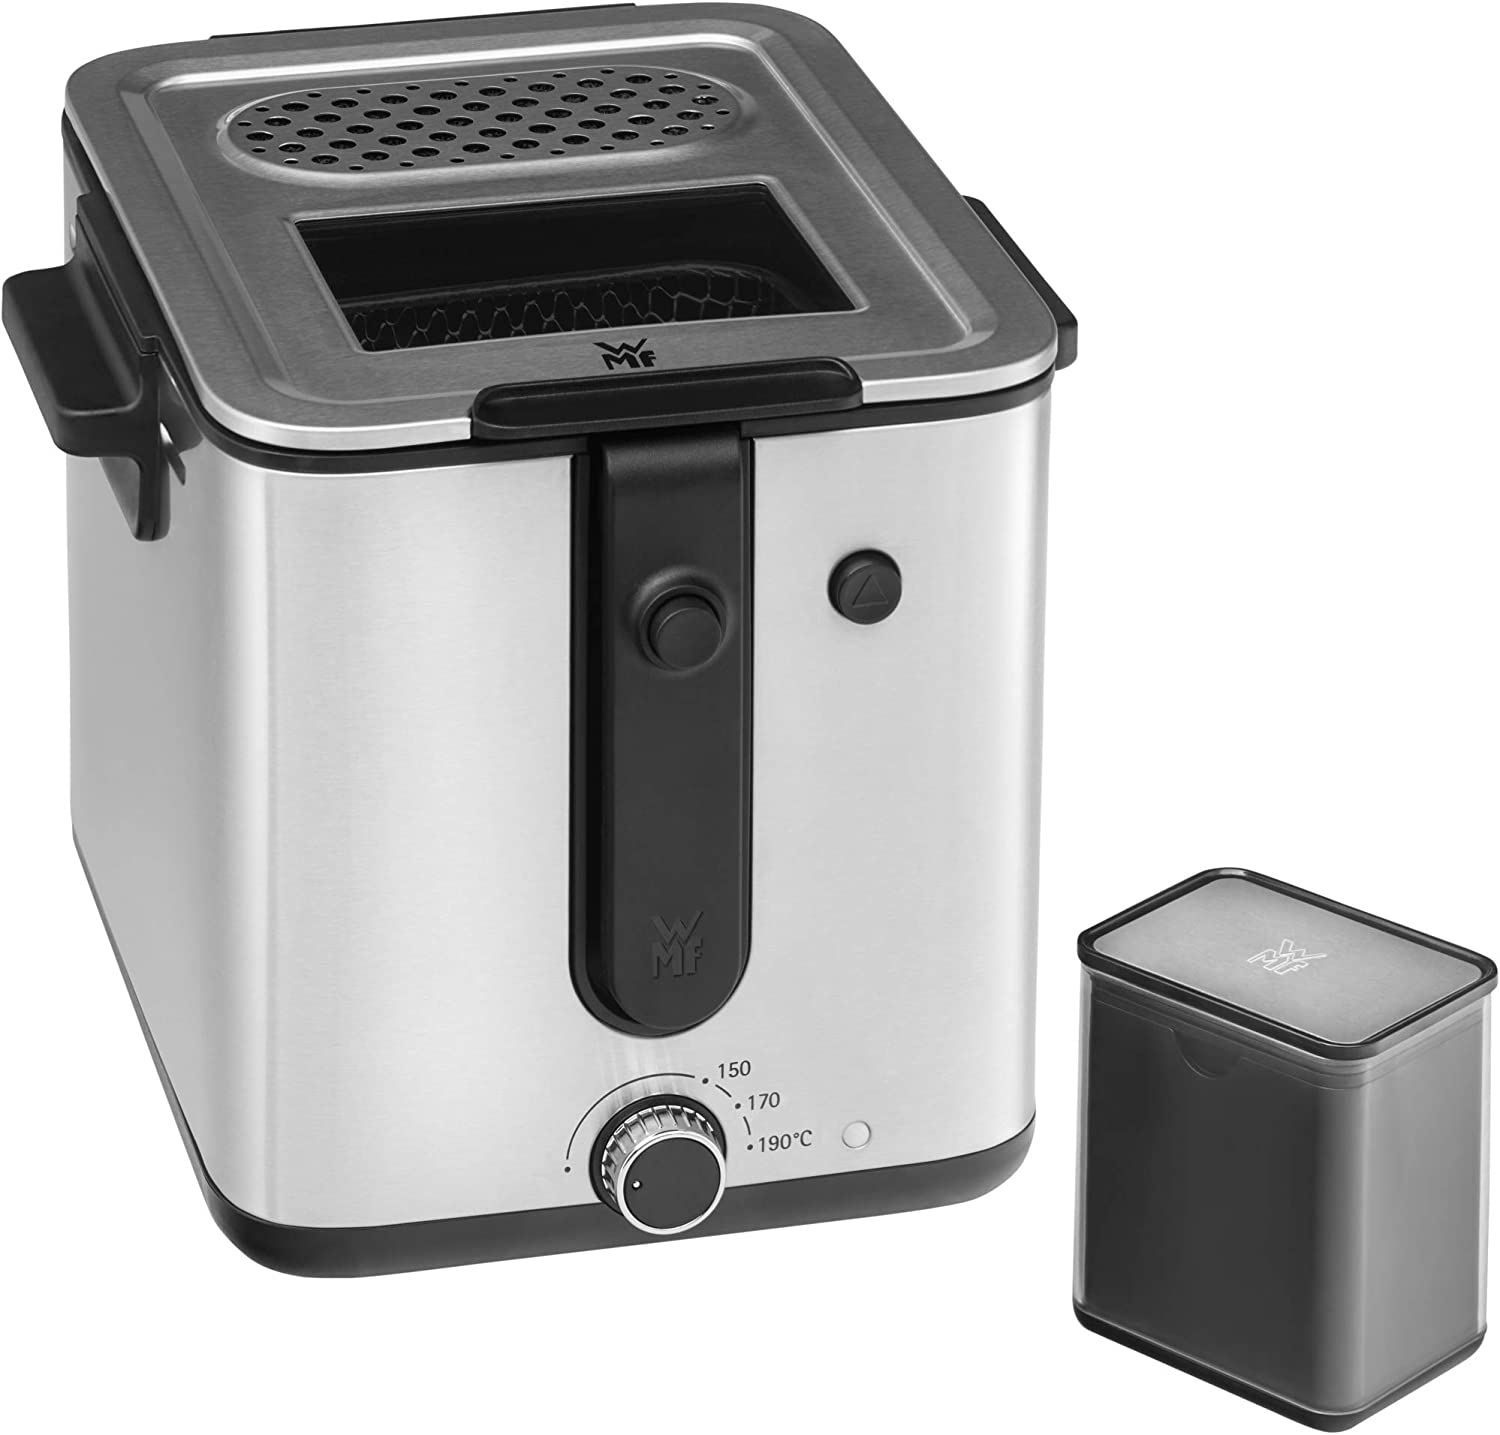 WMF Küchenminis Mini Fryer with Grease/Oil, Deep Fryer with Potato Slicer, 1000 W, Removable Oil Container, for Crispy Fries, Matte Stainless Steel